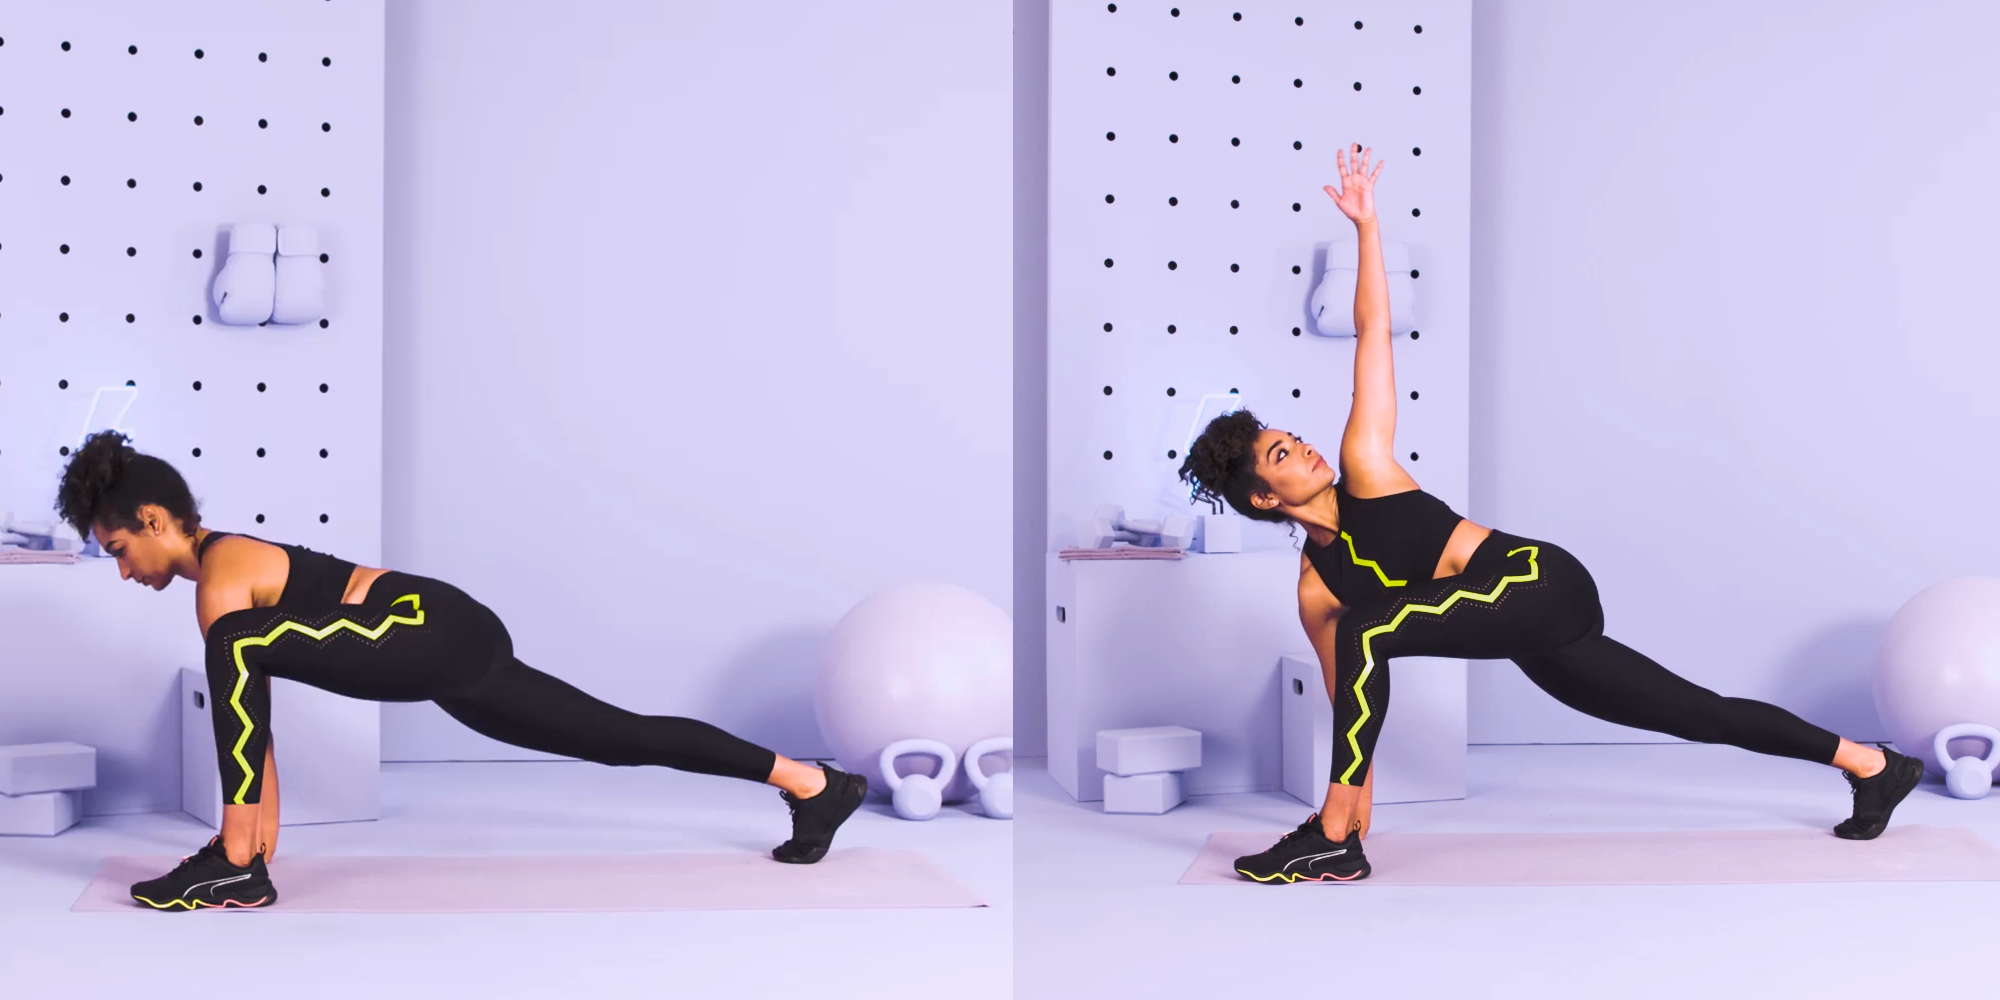 10 Hip Stretches Your Body Needs Even More Than You Realize